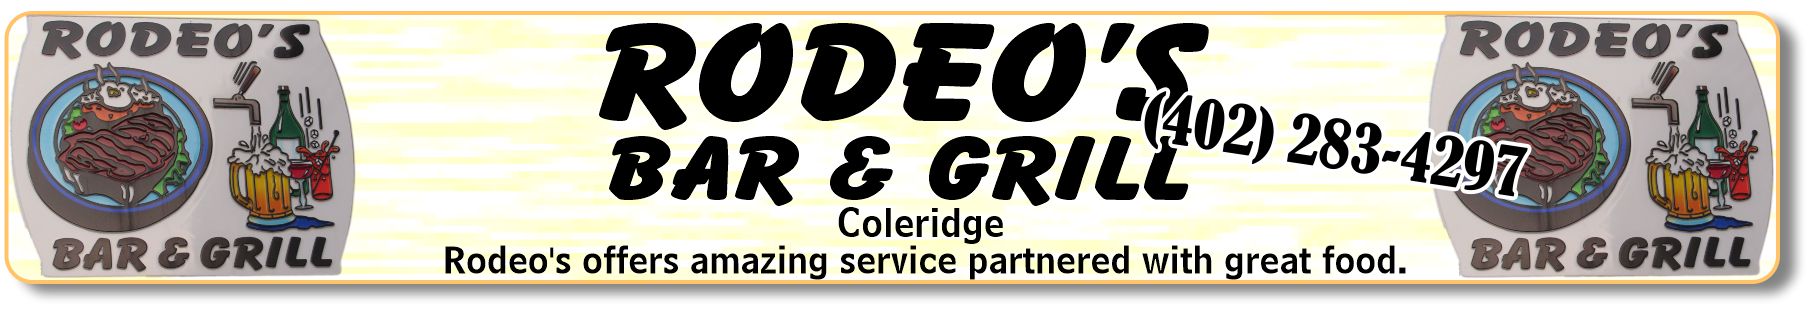 Rodeo's Bar and Grill - Coleridge